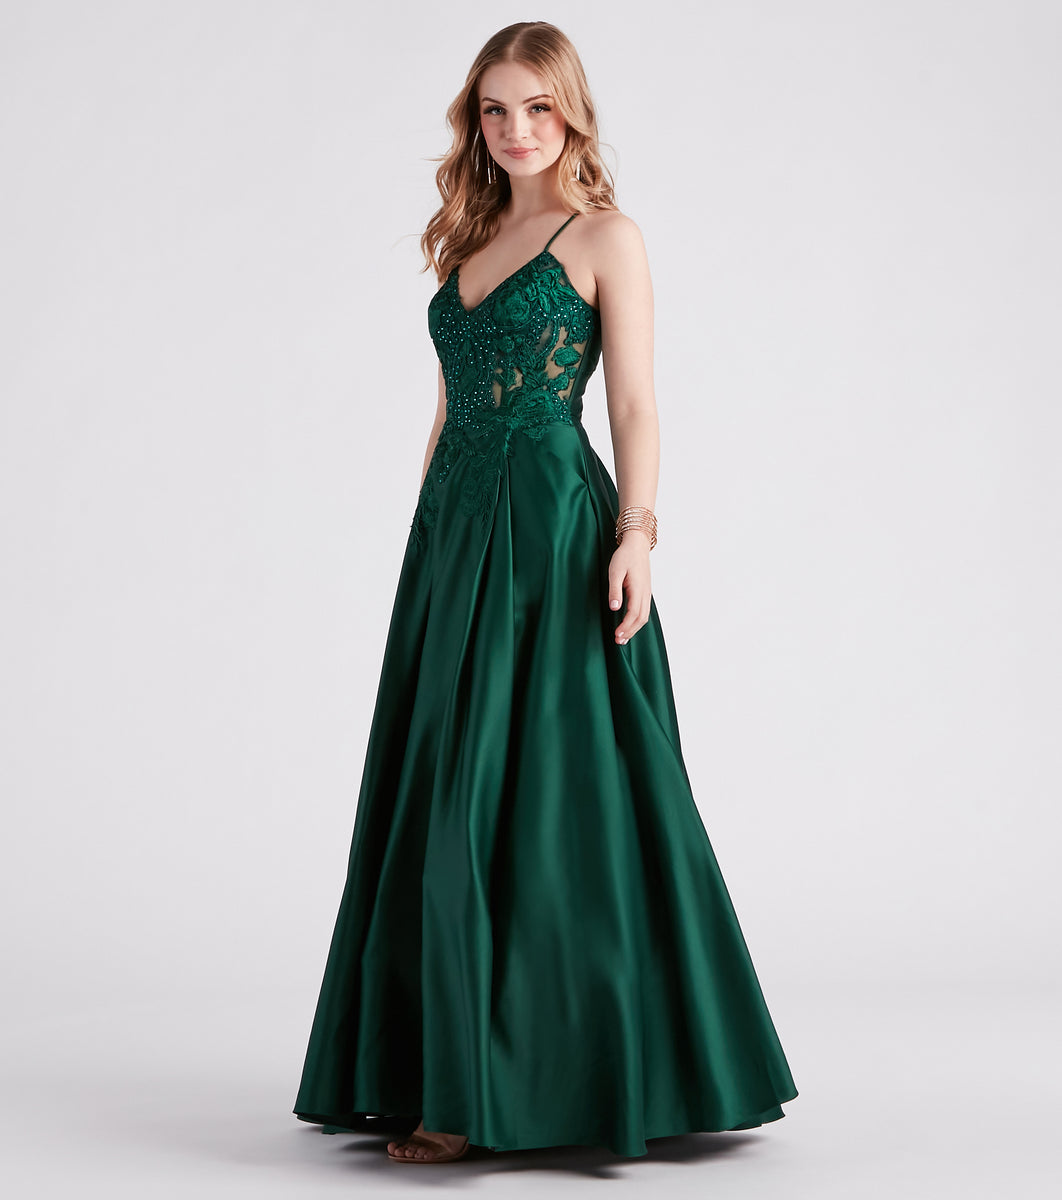 Kloey Satin Lace A-Line Ball Gown